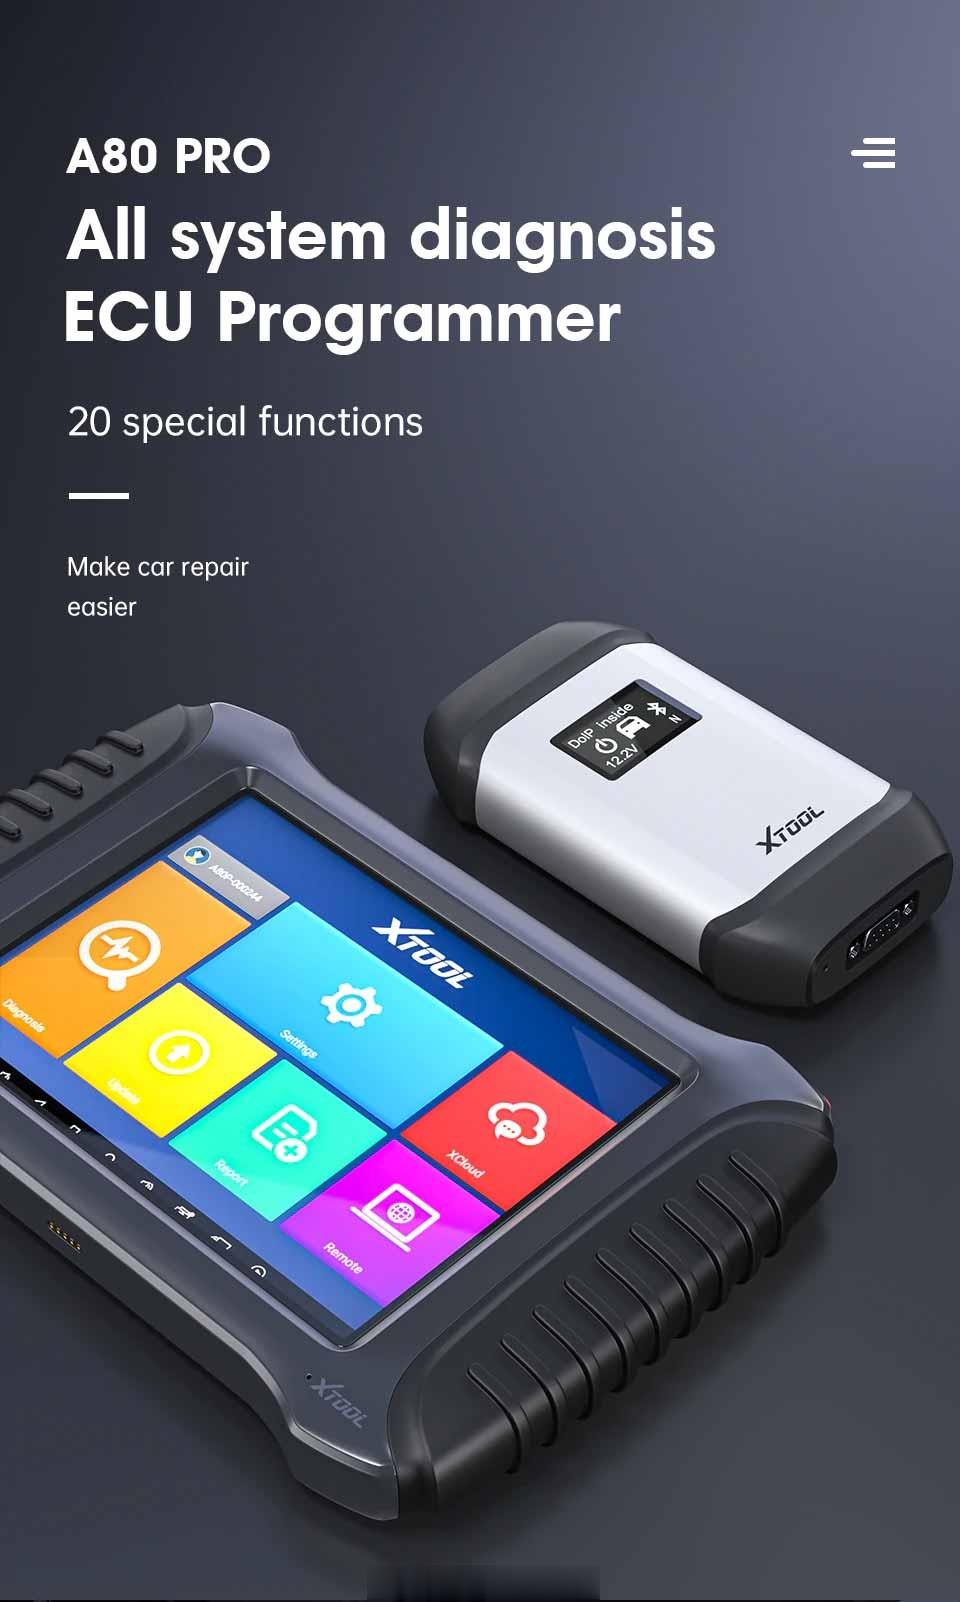 XTOOL A80 Pro User Guide1 (2)